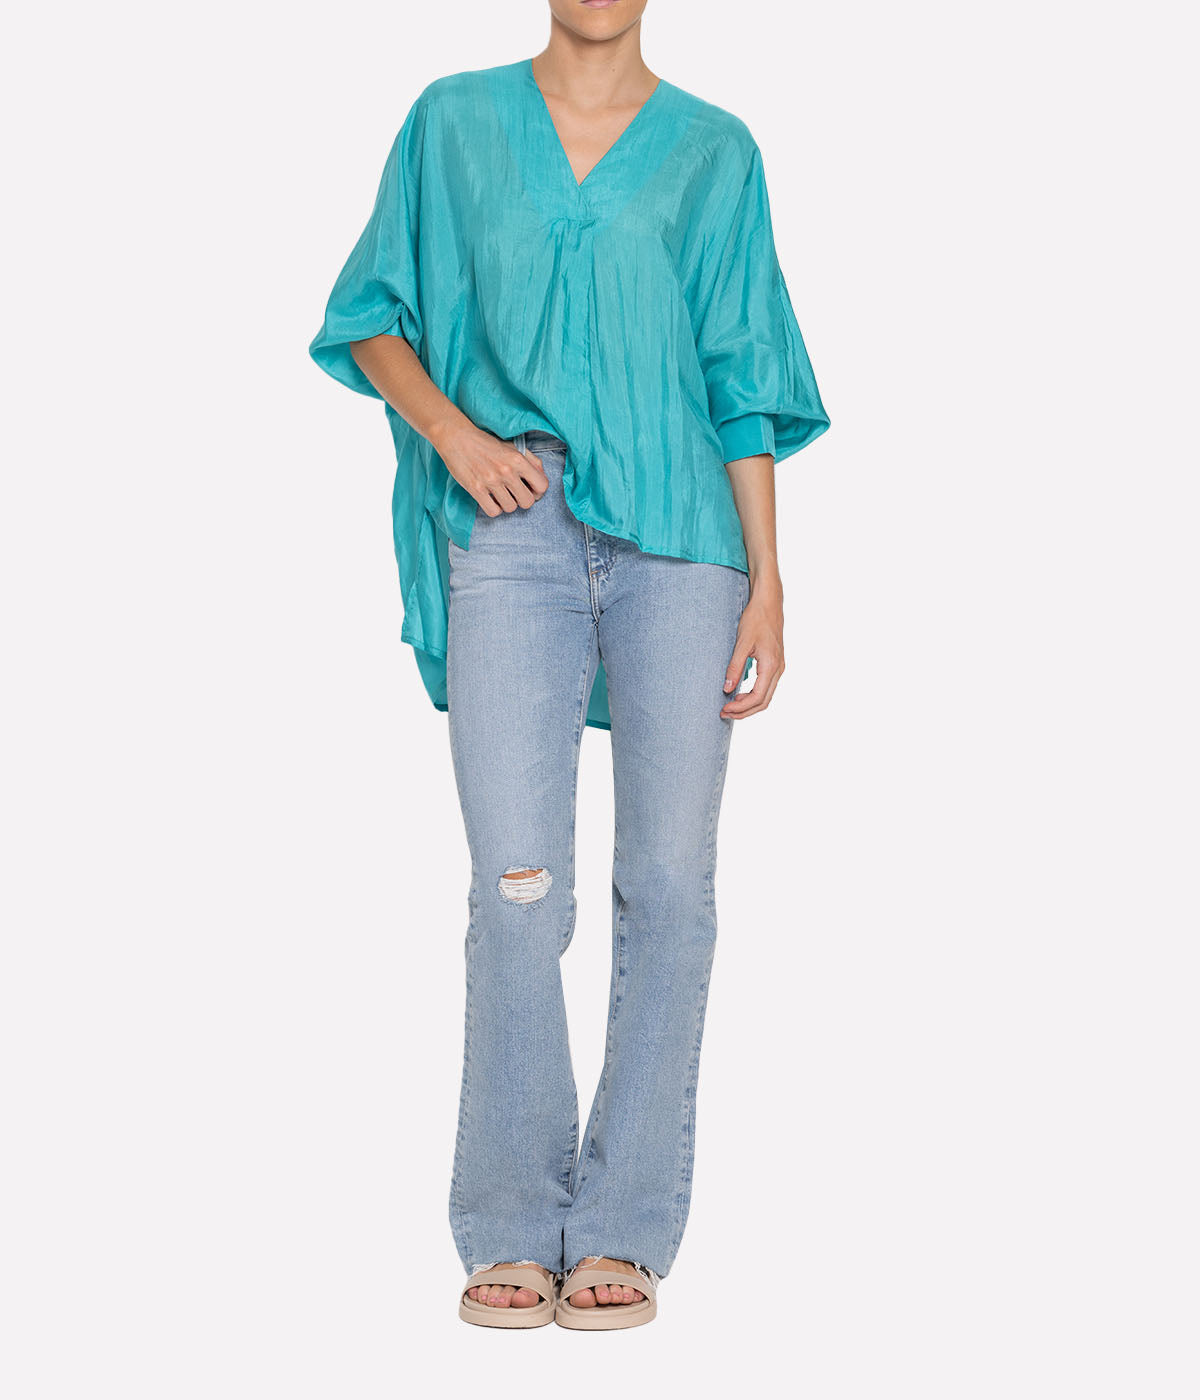 Indochine Blouse in Turquoise